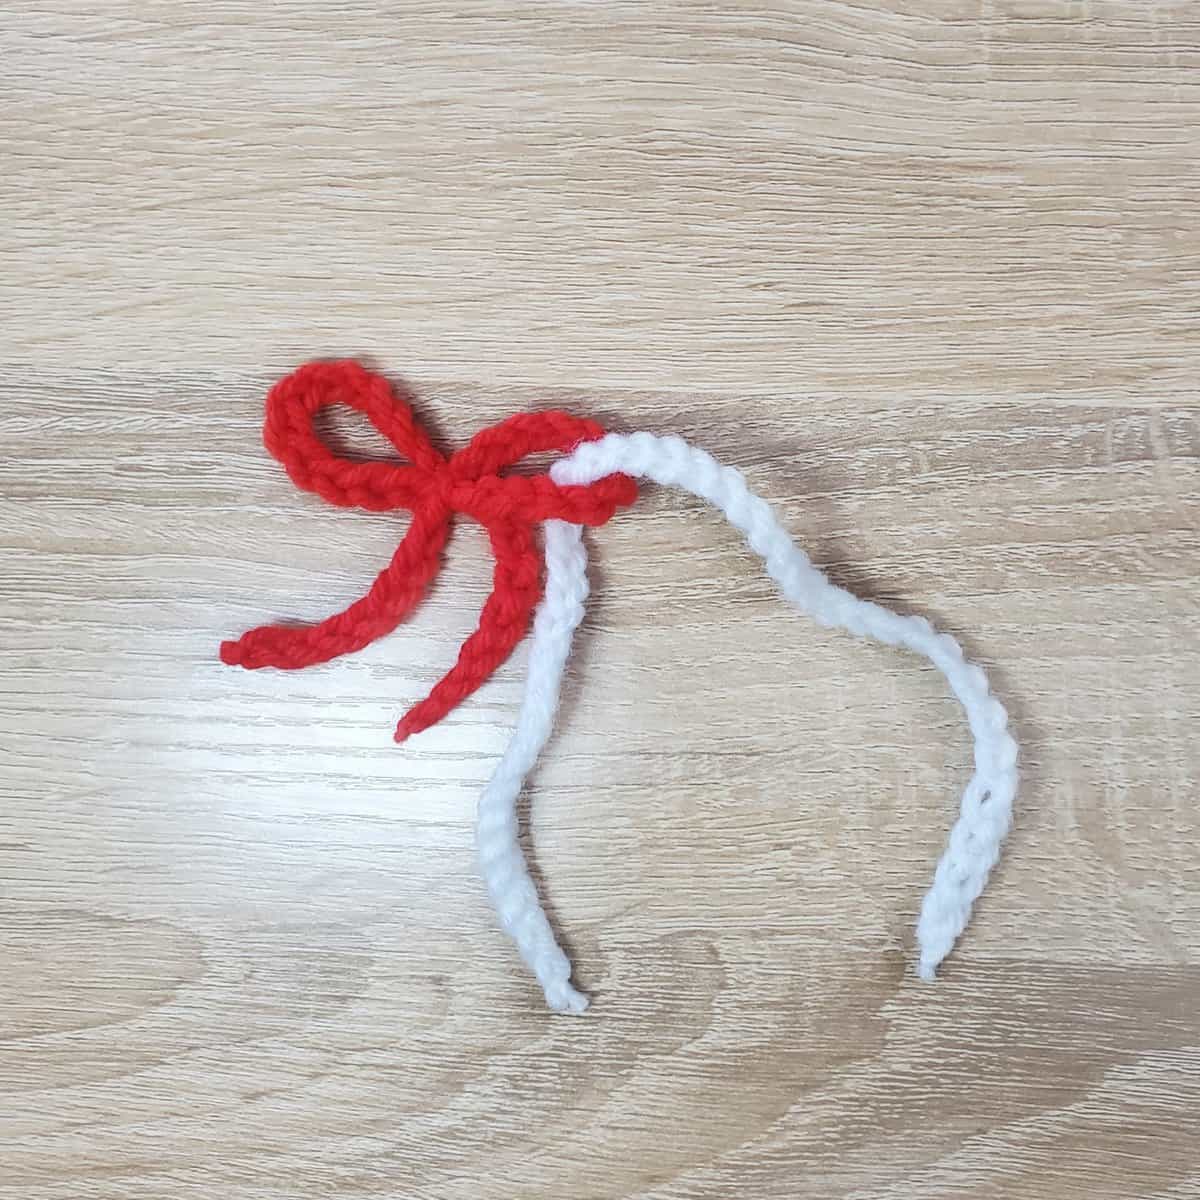 completed crochet bow with white thread